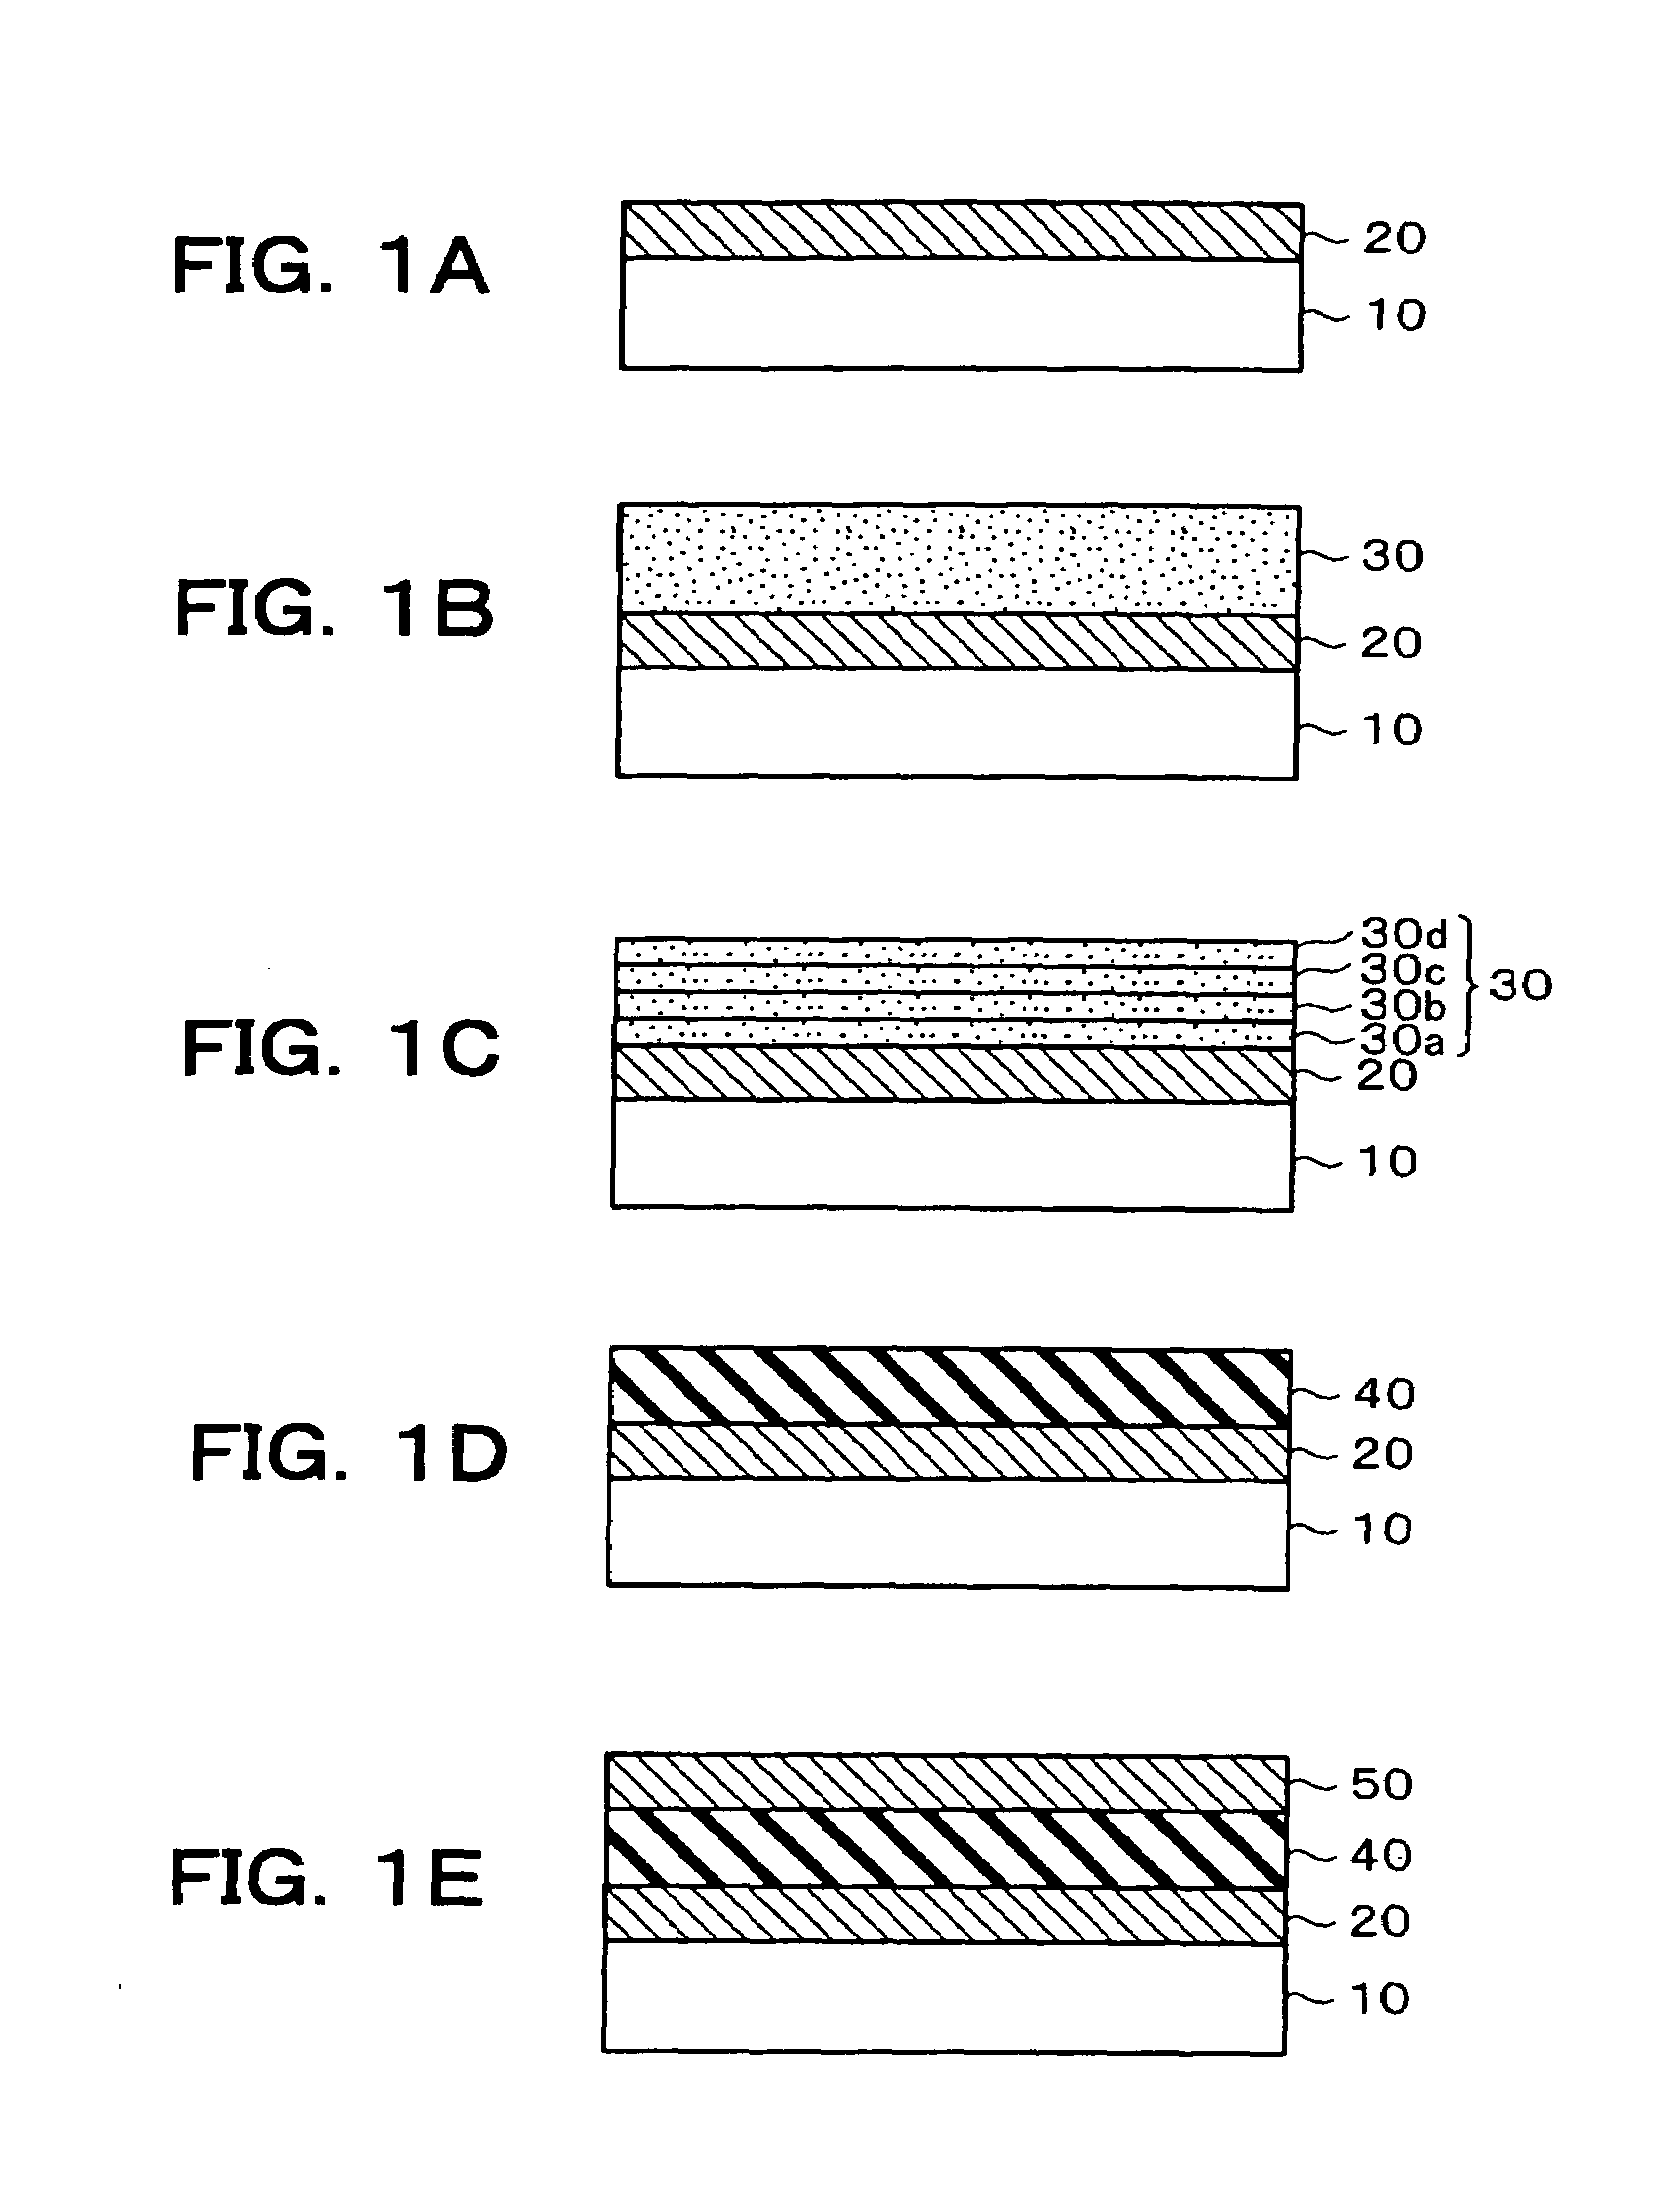 Ferroelectric material, ferroelectric film and method of manufacturing the same, ferroelectric capacitor and method of manufacturing the same, ferroelectric memory, and piezoelectric device